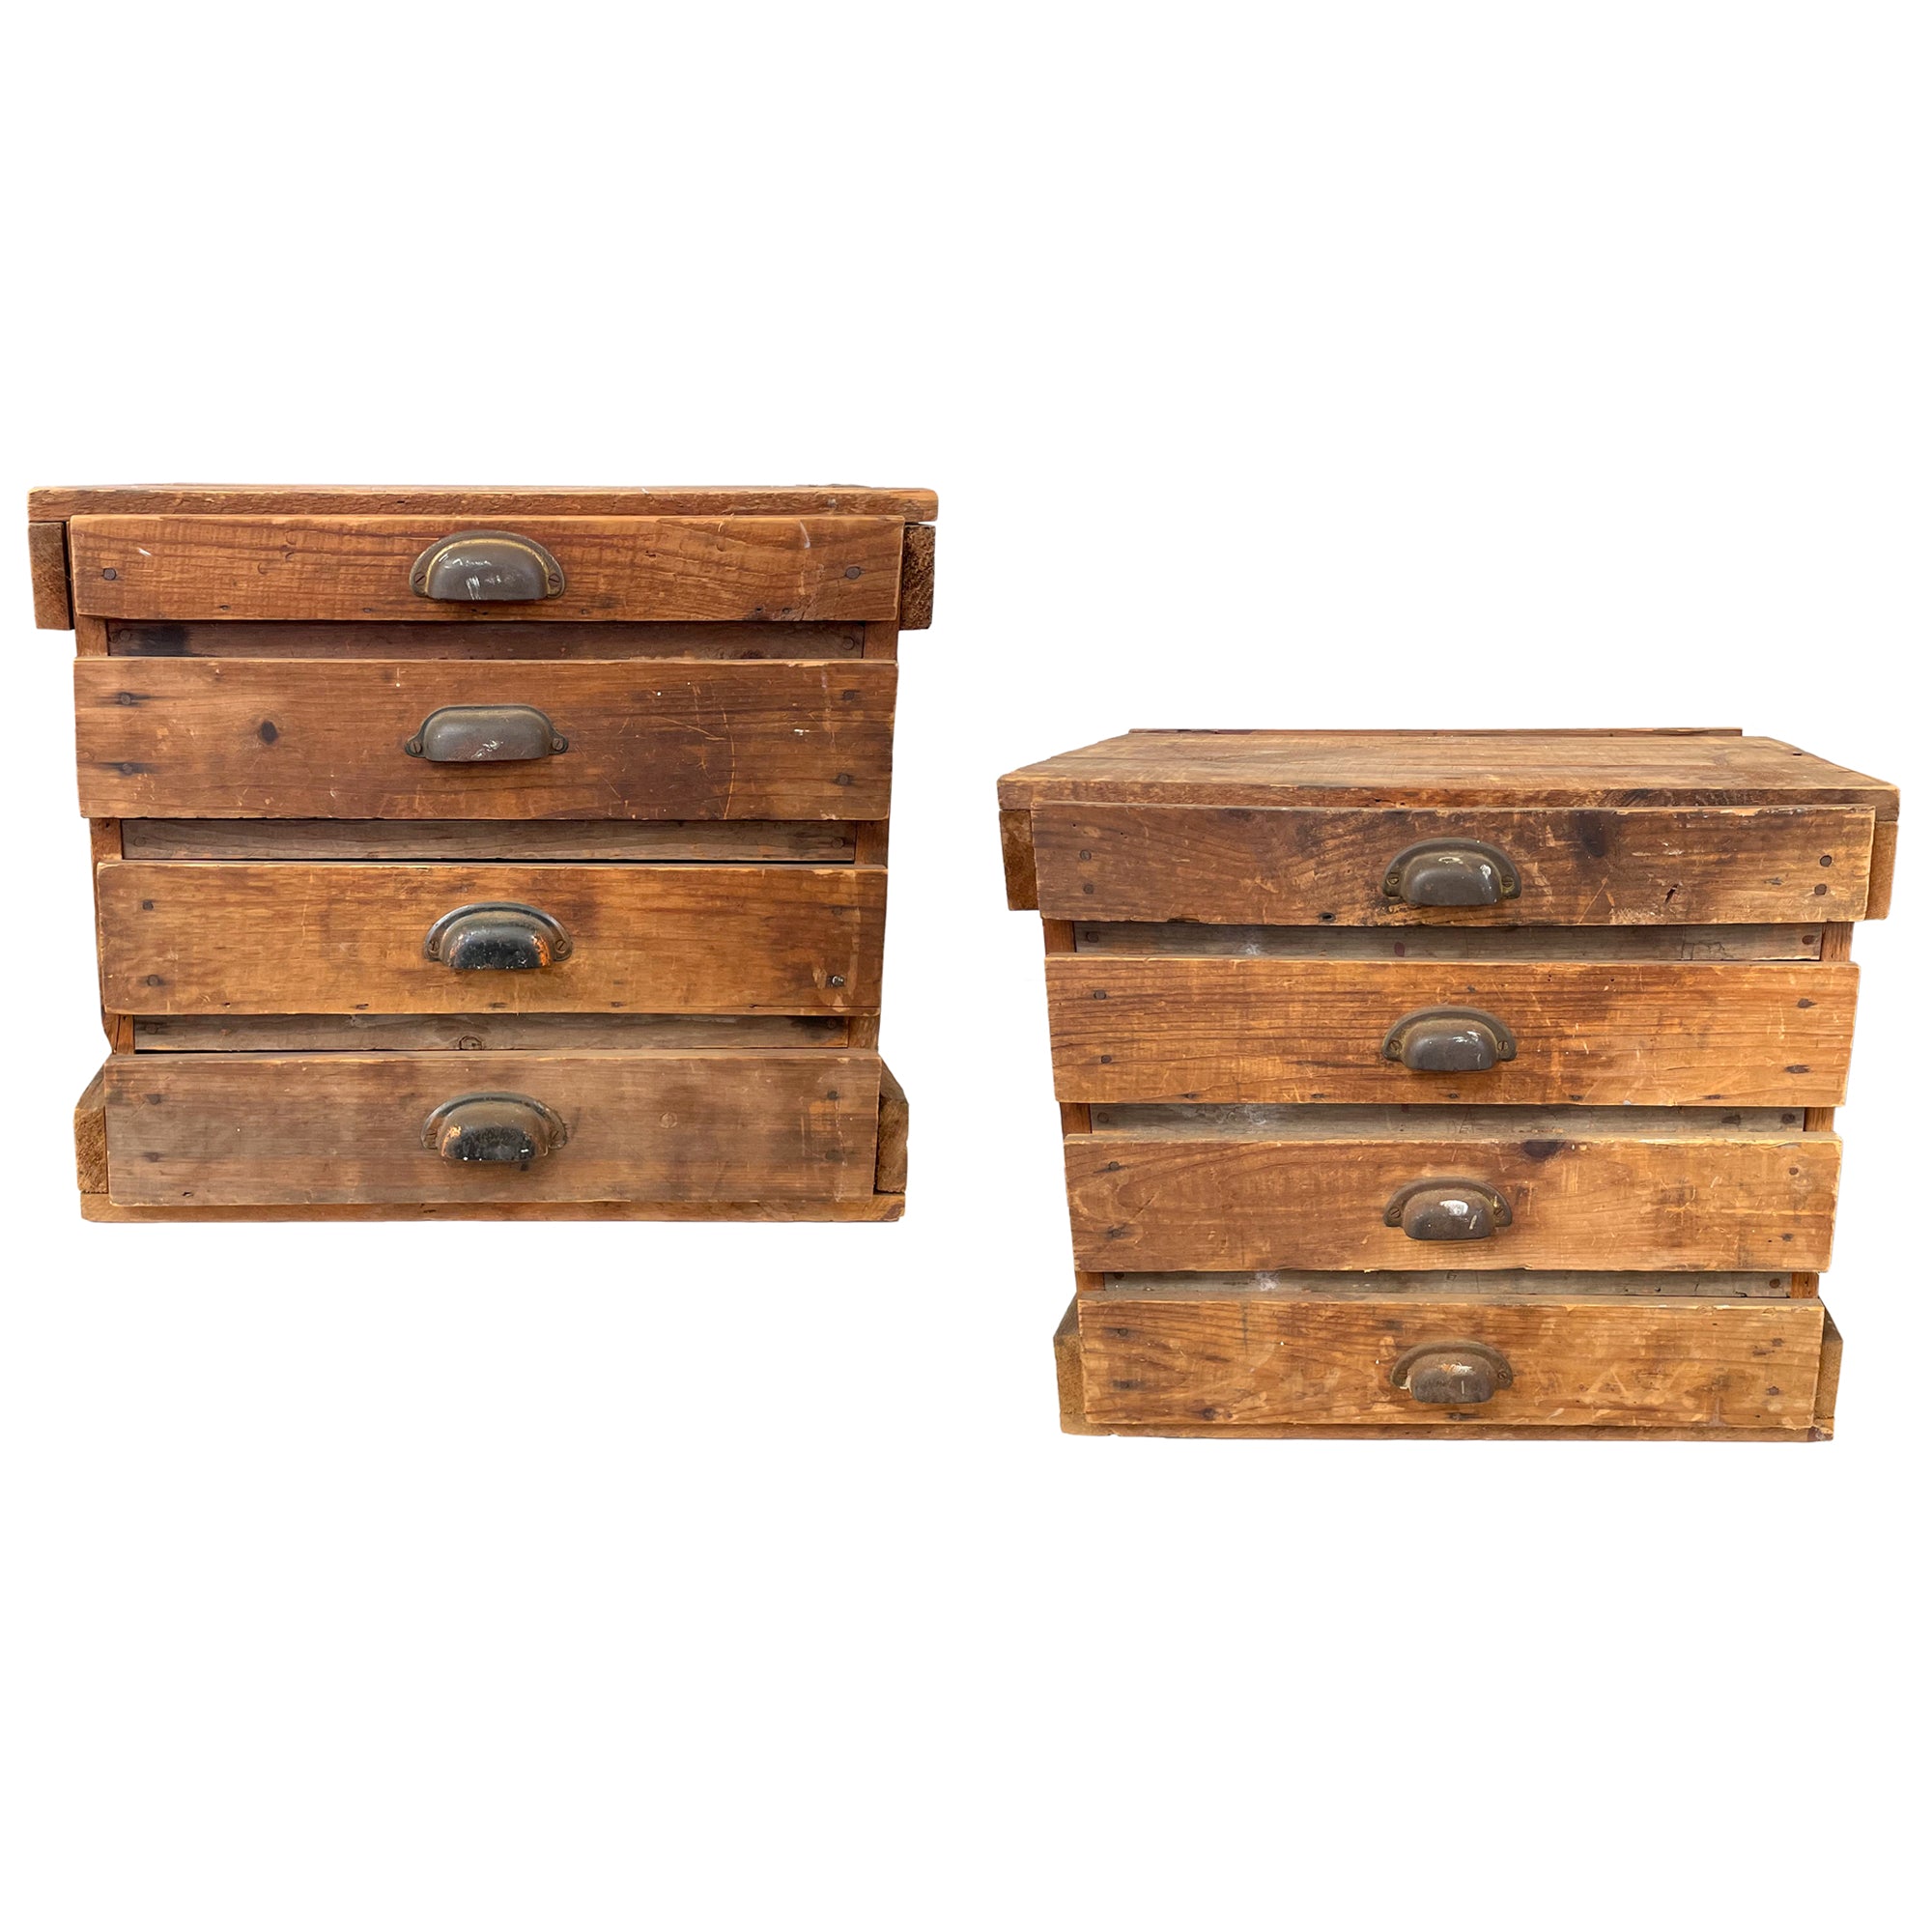 Pair of Small Rustic Wood Chests of Drawers